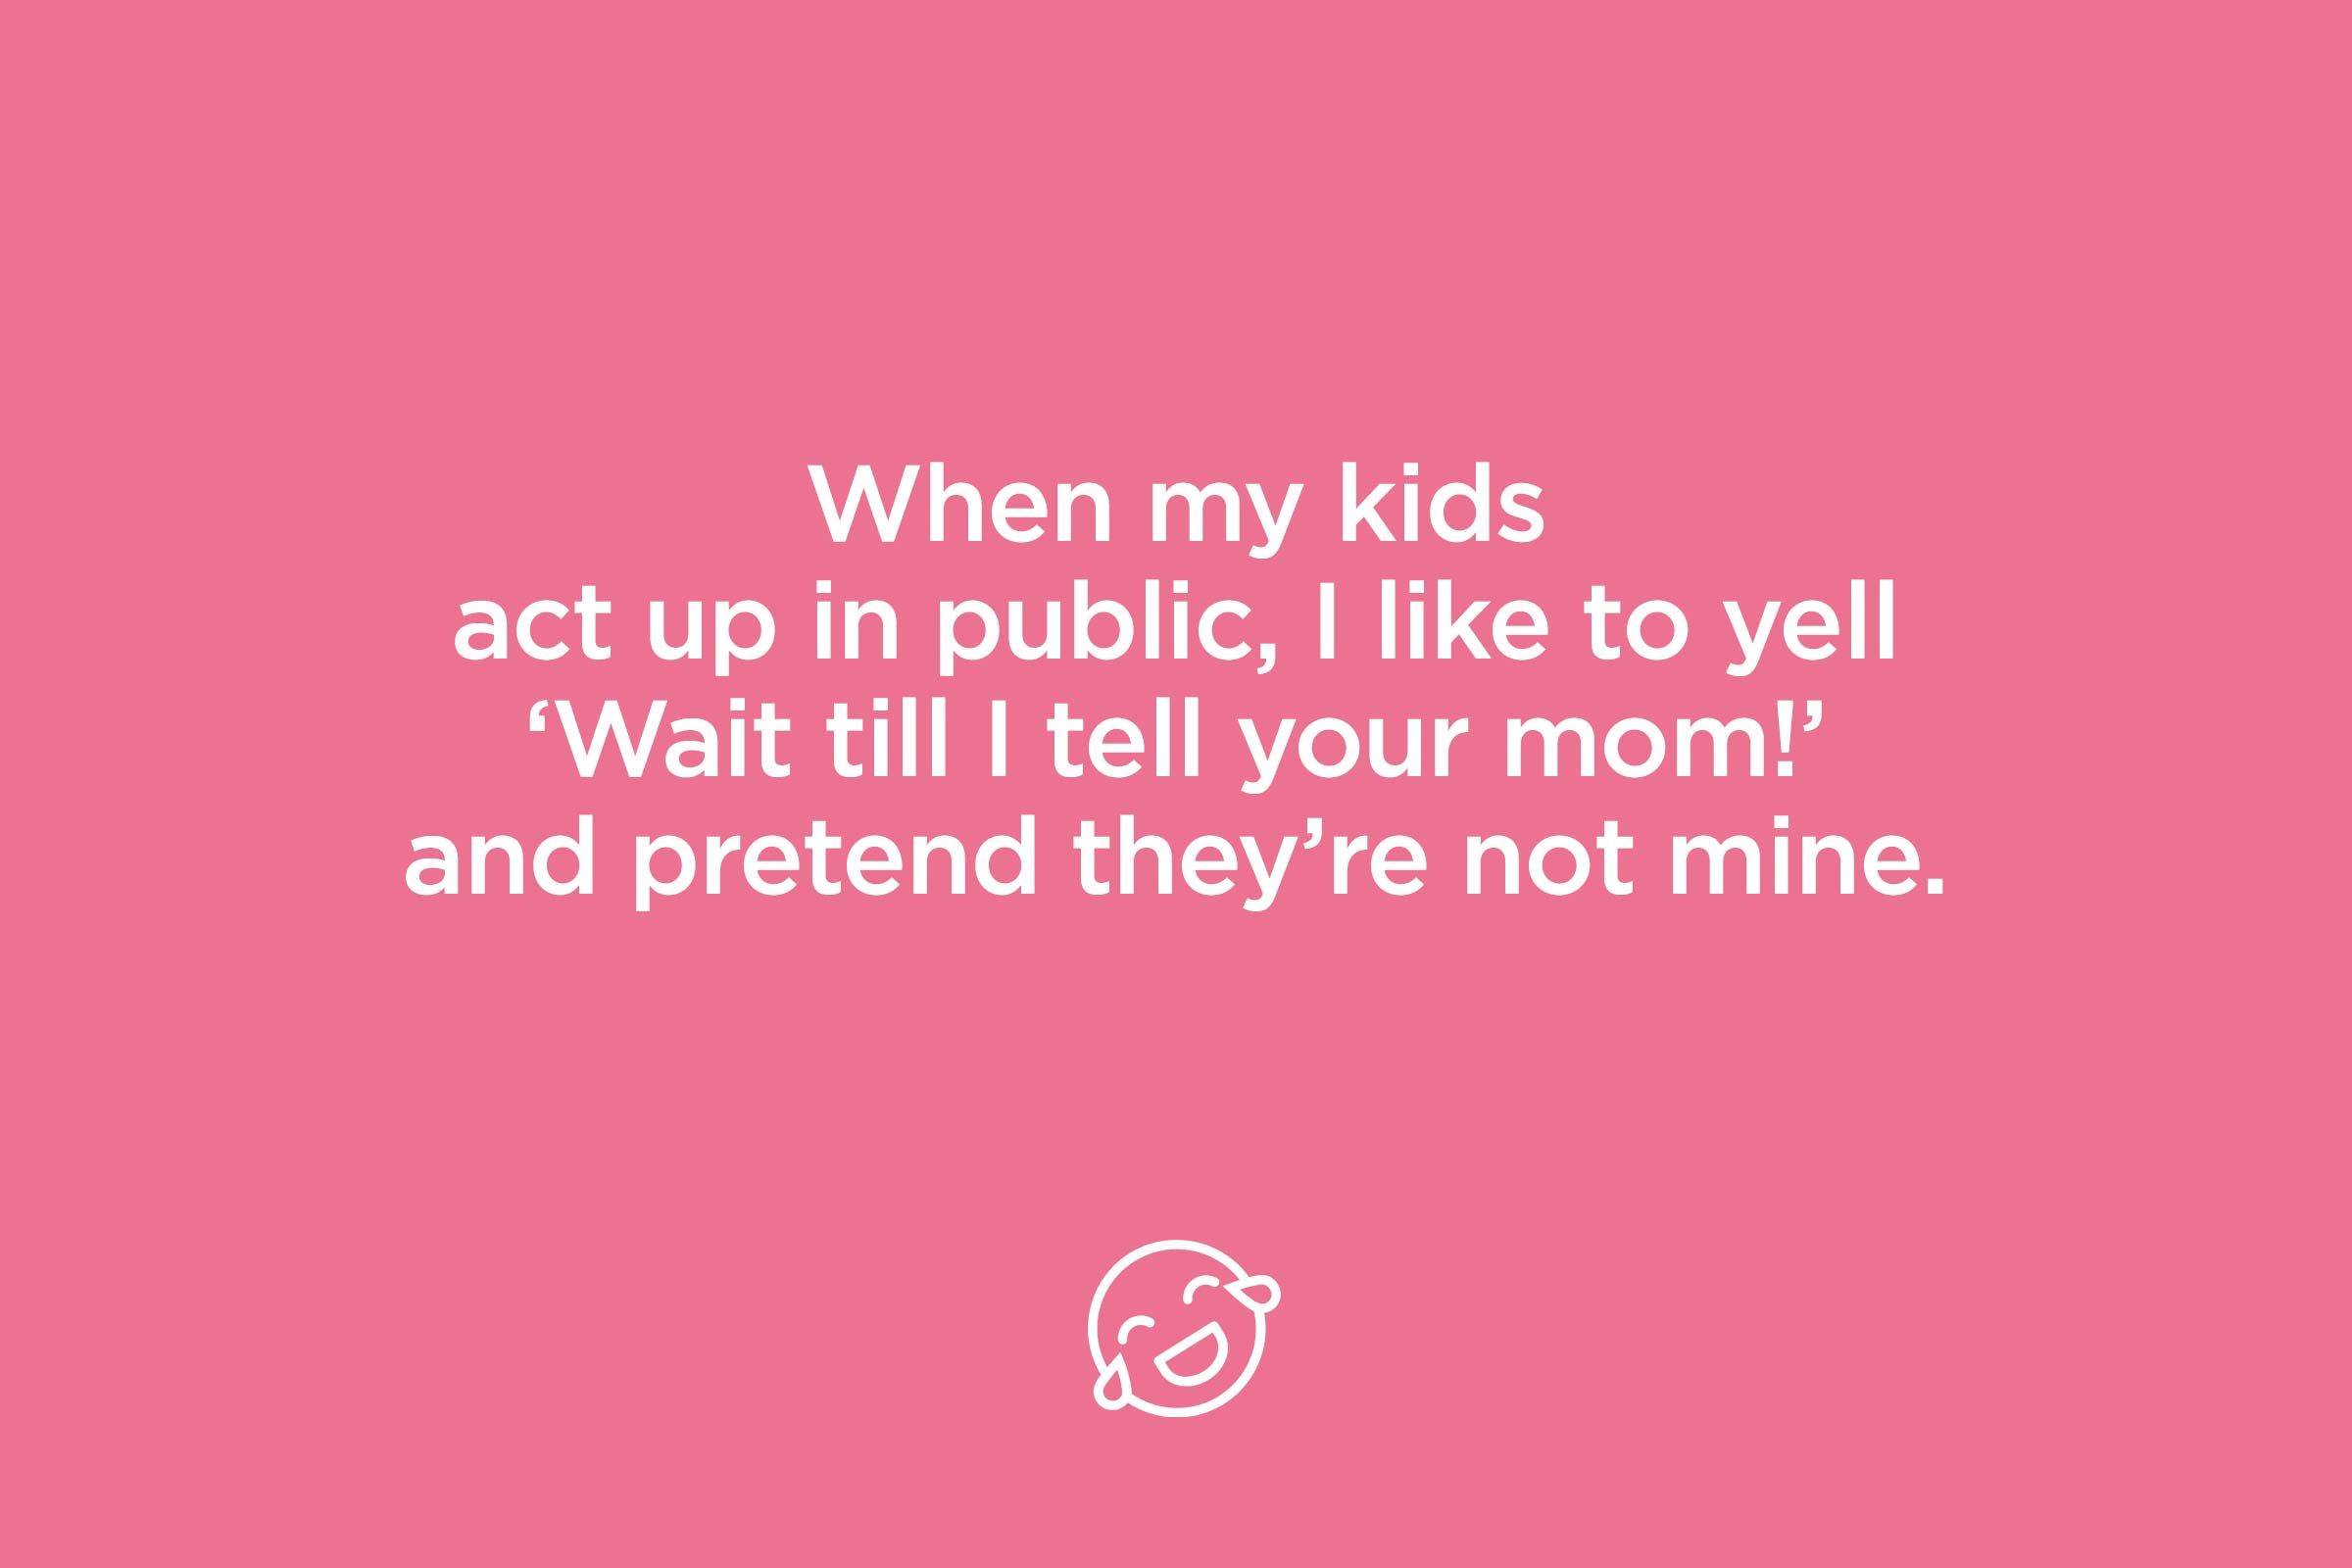 Funny Mom Quotes That Will Have You Cry-Laughing | Reader's Digest